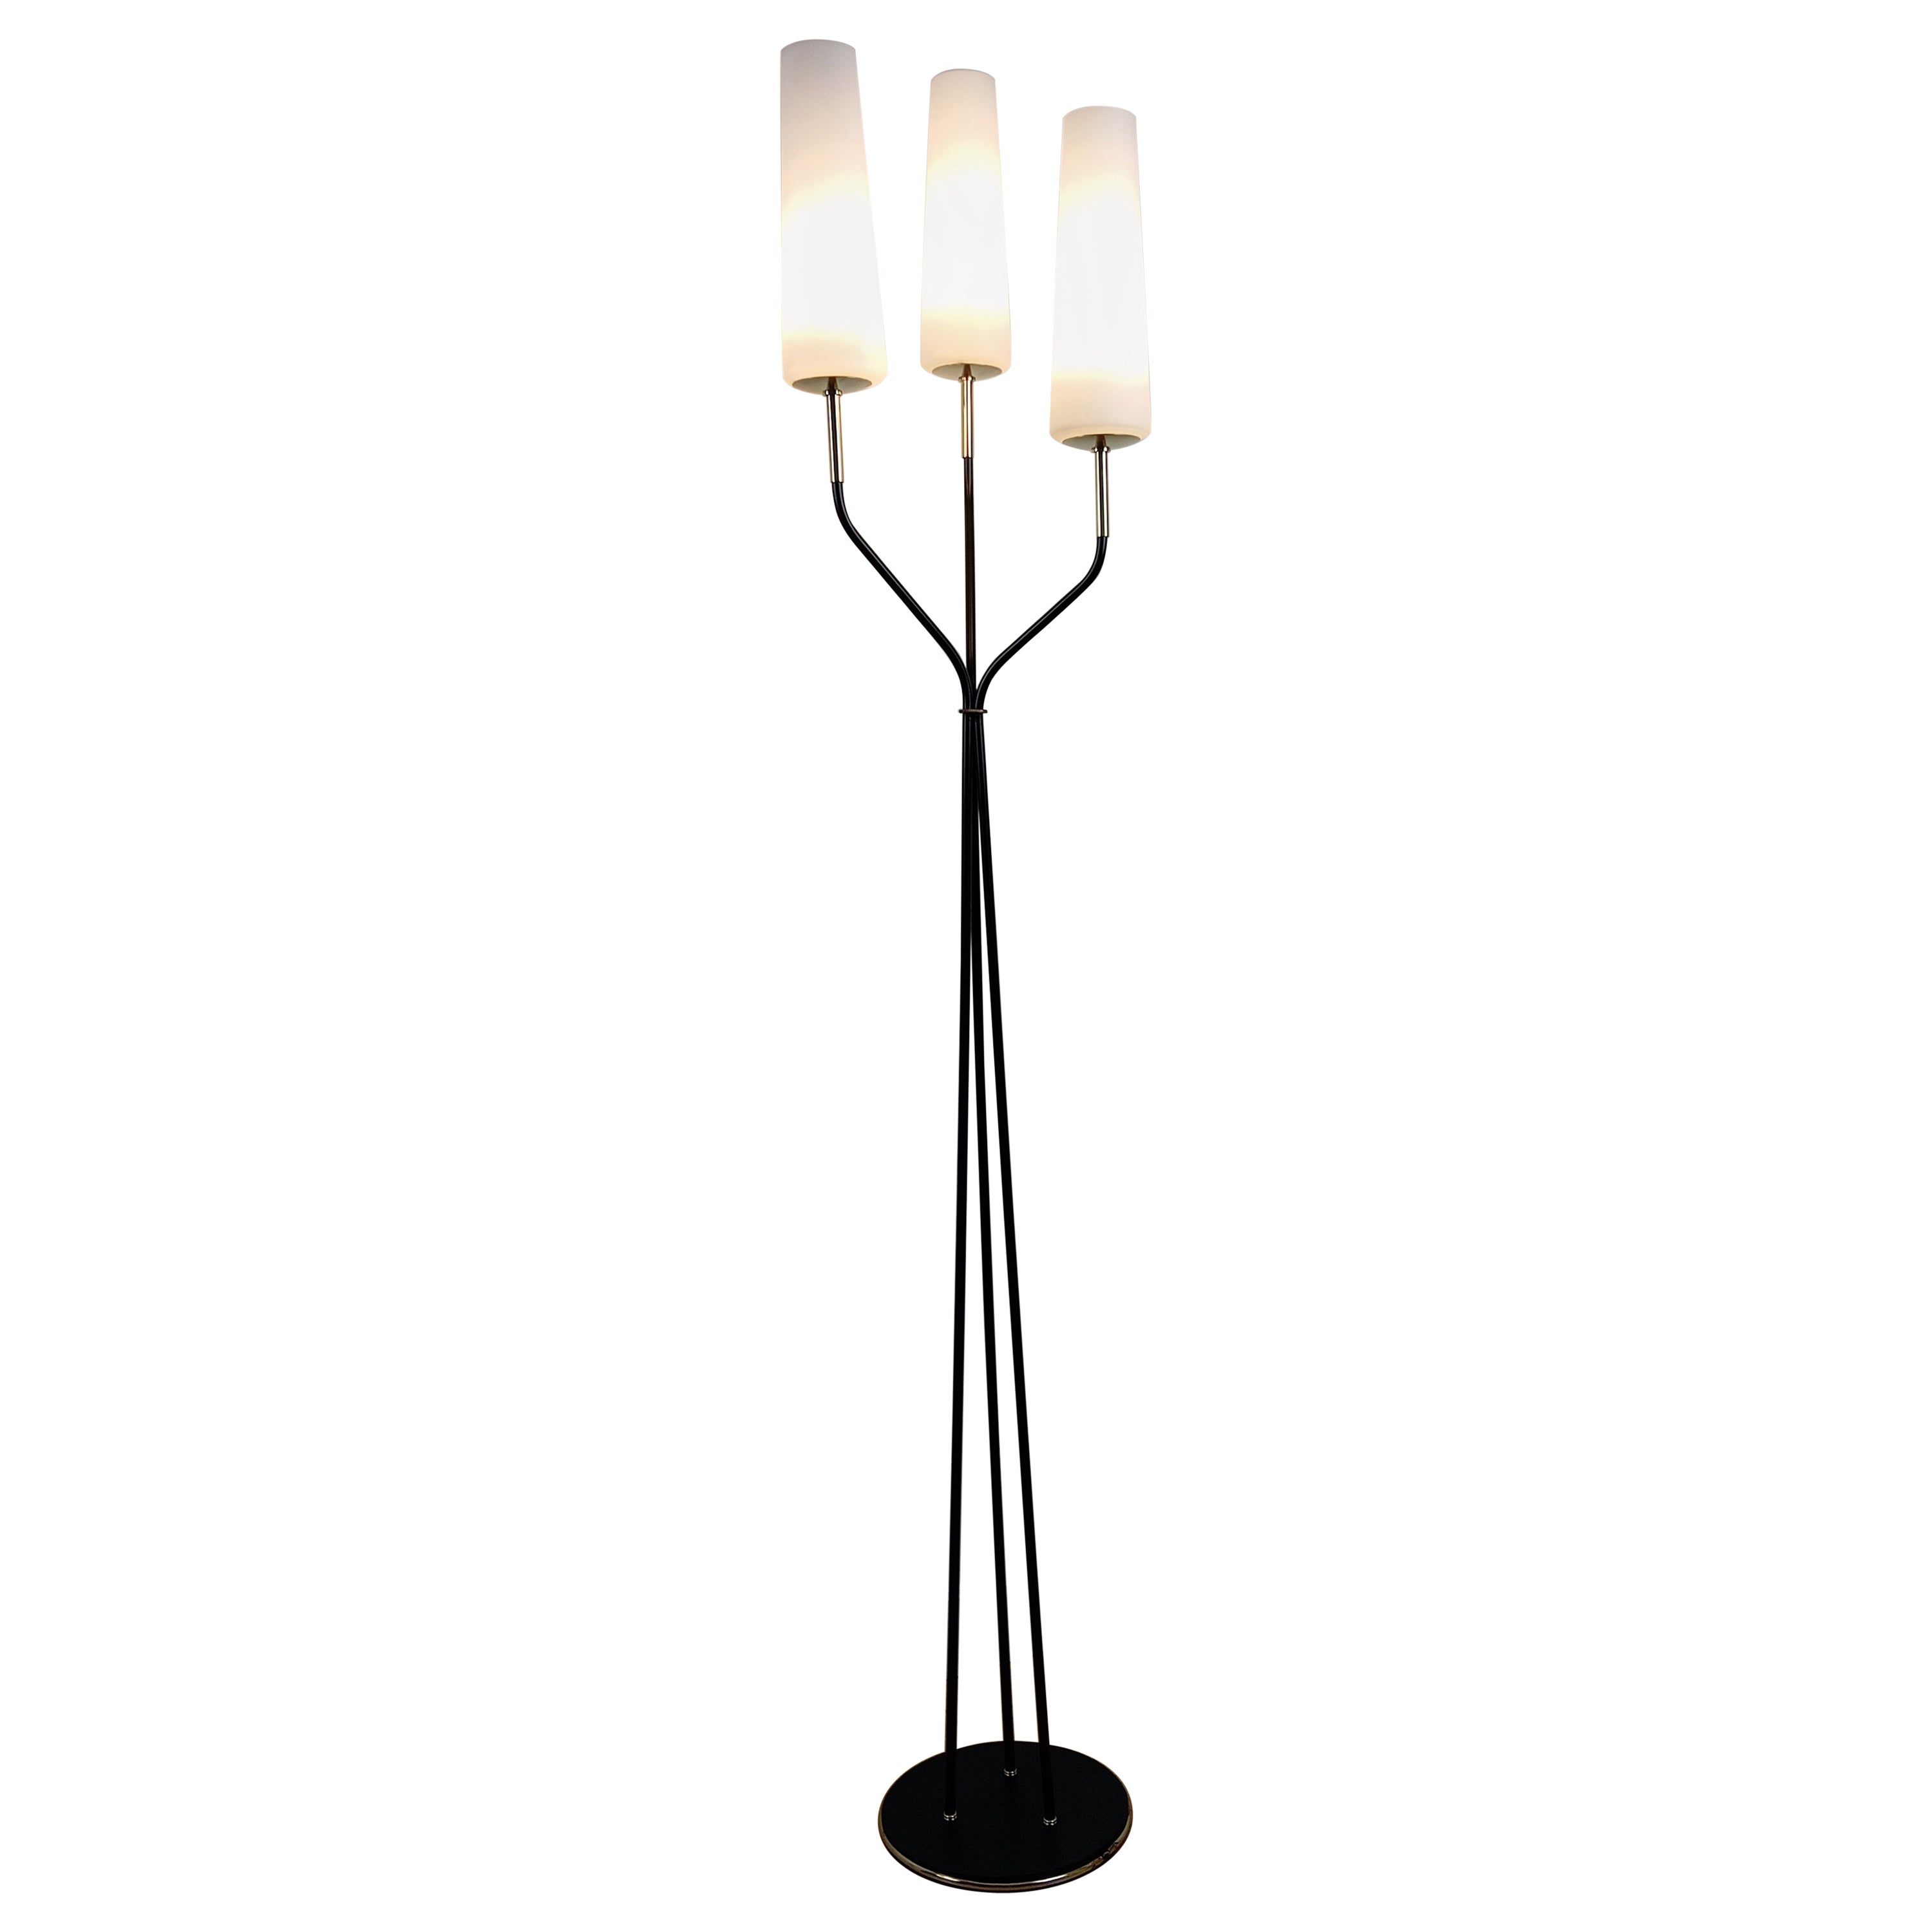 Floor lamp with 3 light arms, Maison Lunel circa 1950 For Sale